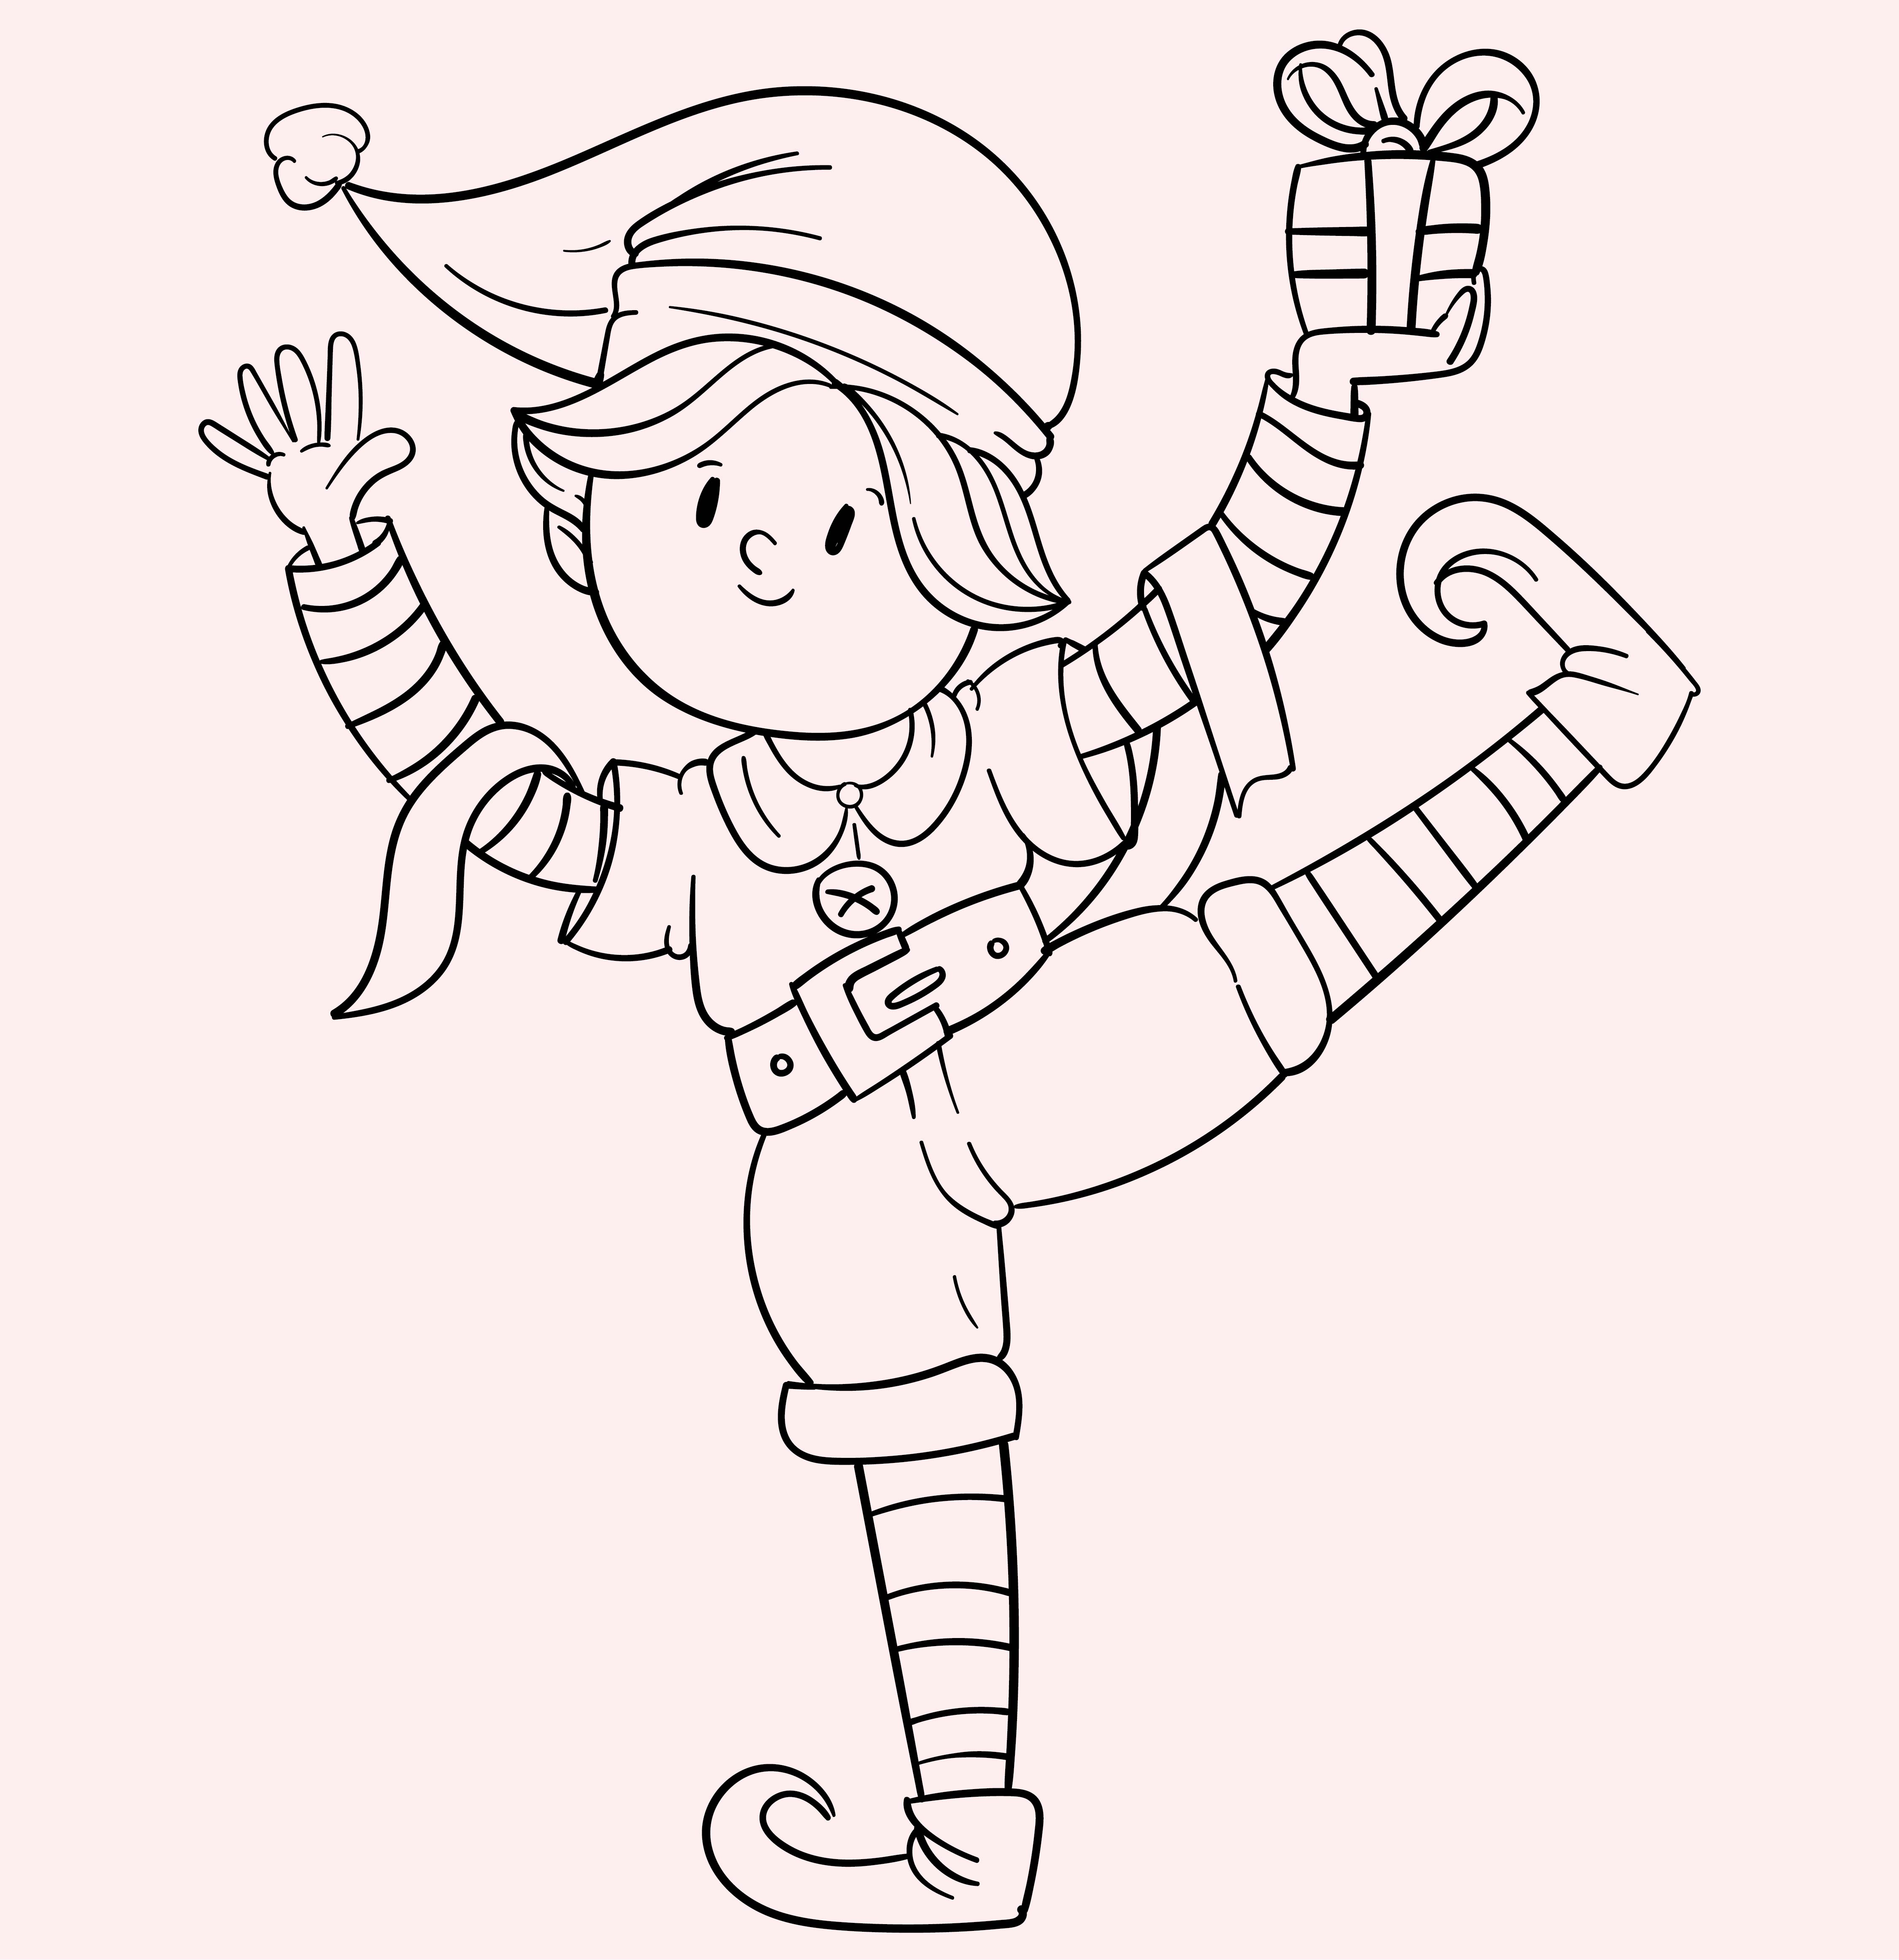 Printable Elf Coloring Pages